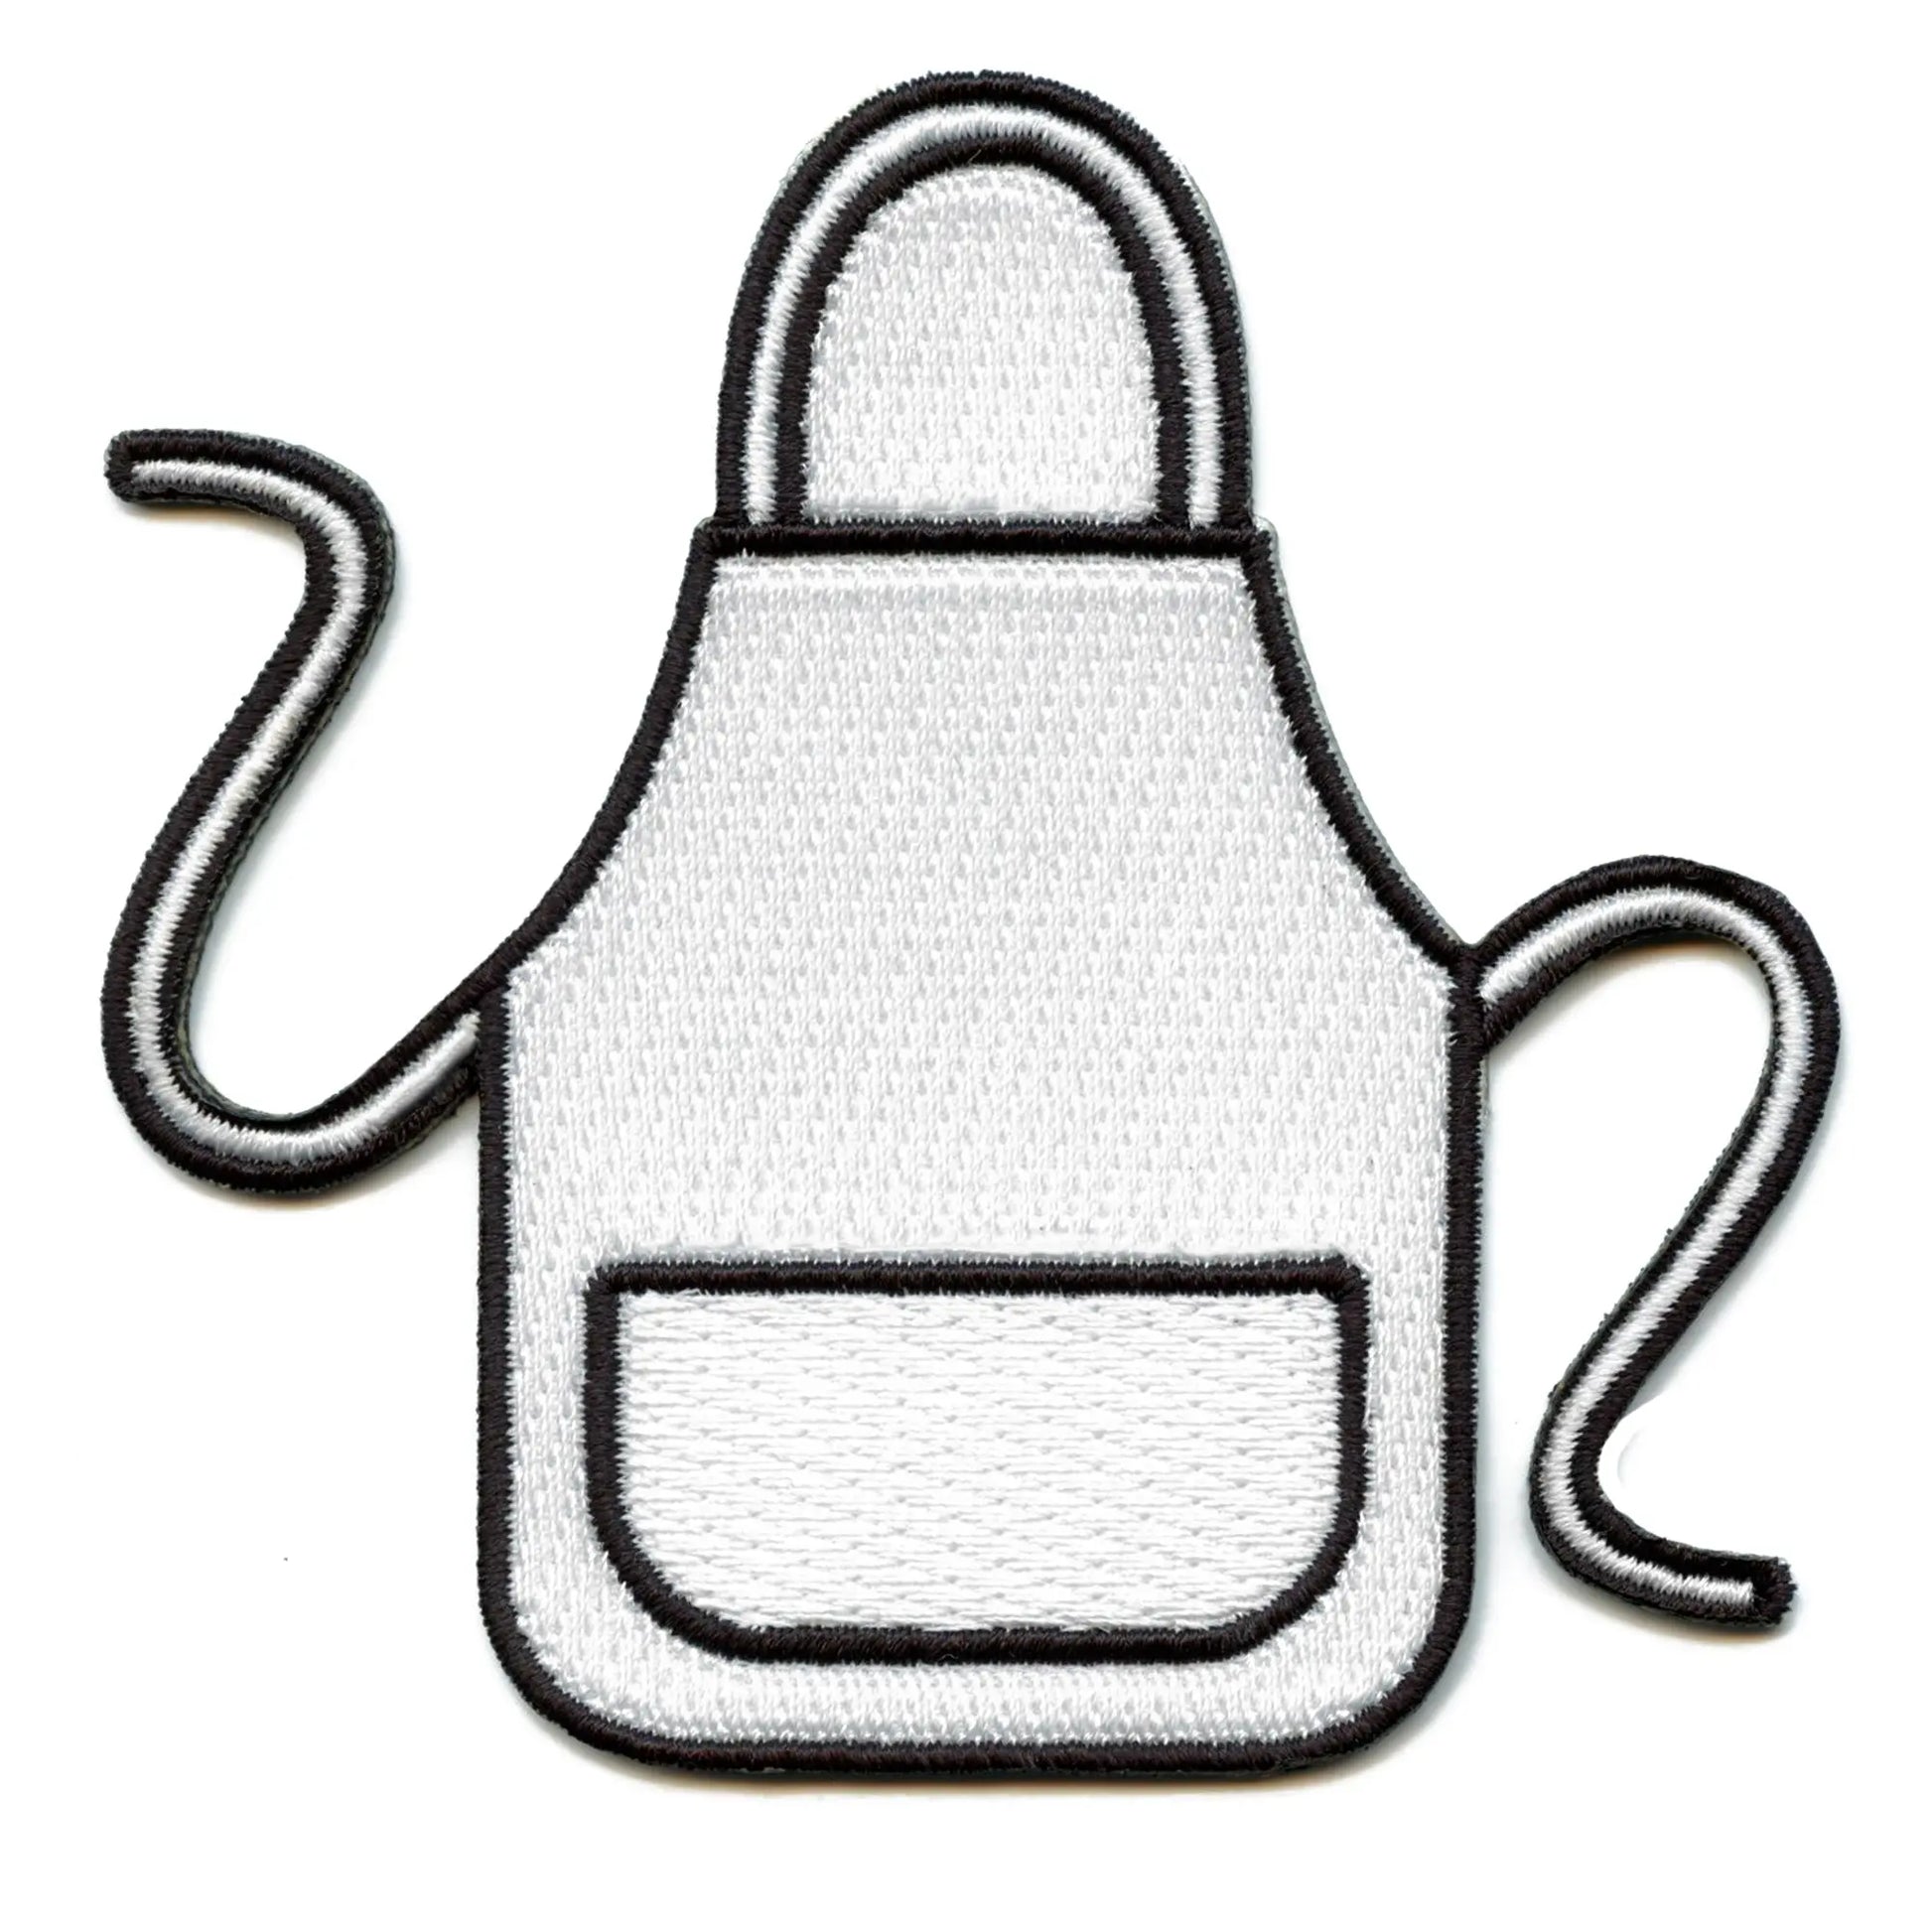 Apron Emoji Embroidered Iron On Patch 